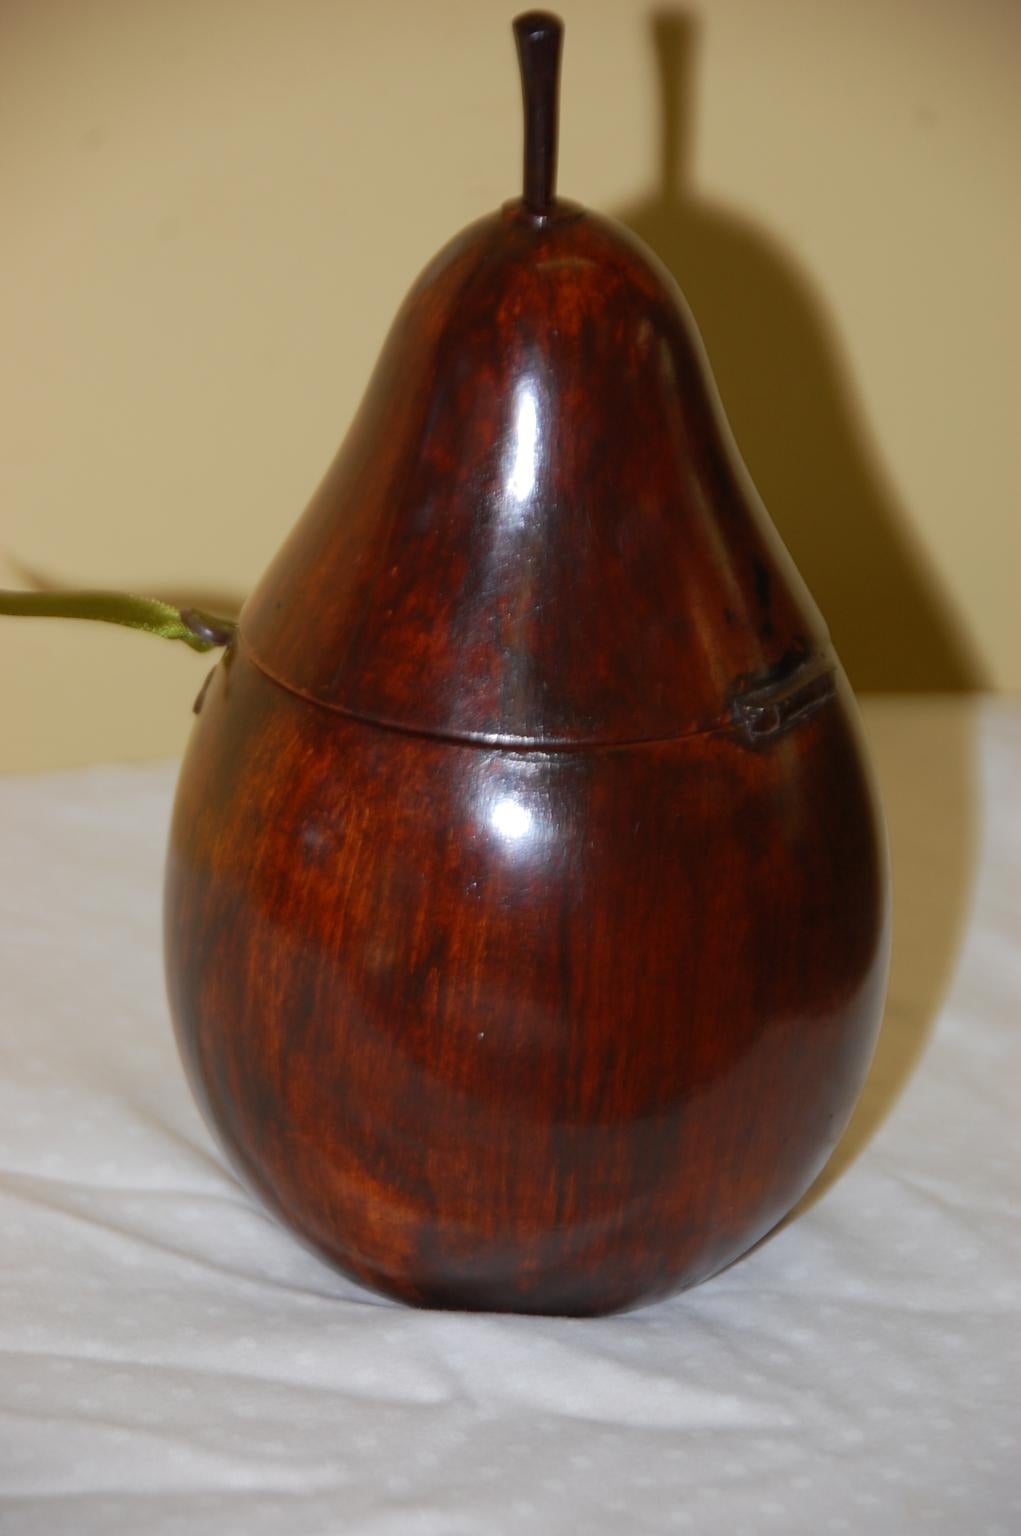 English Georgian pear tea caddy in pear wood, hand carved from a single block of wood, complete with original iron escutcheon, hinge, key and stem, retaining remnants of its original foil lining, circa 1800.